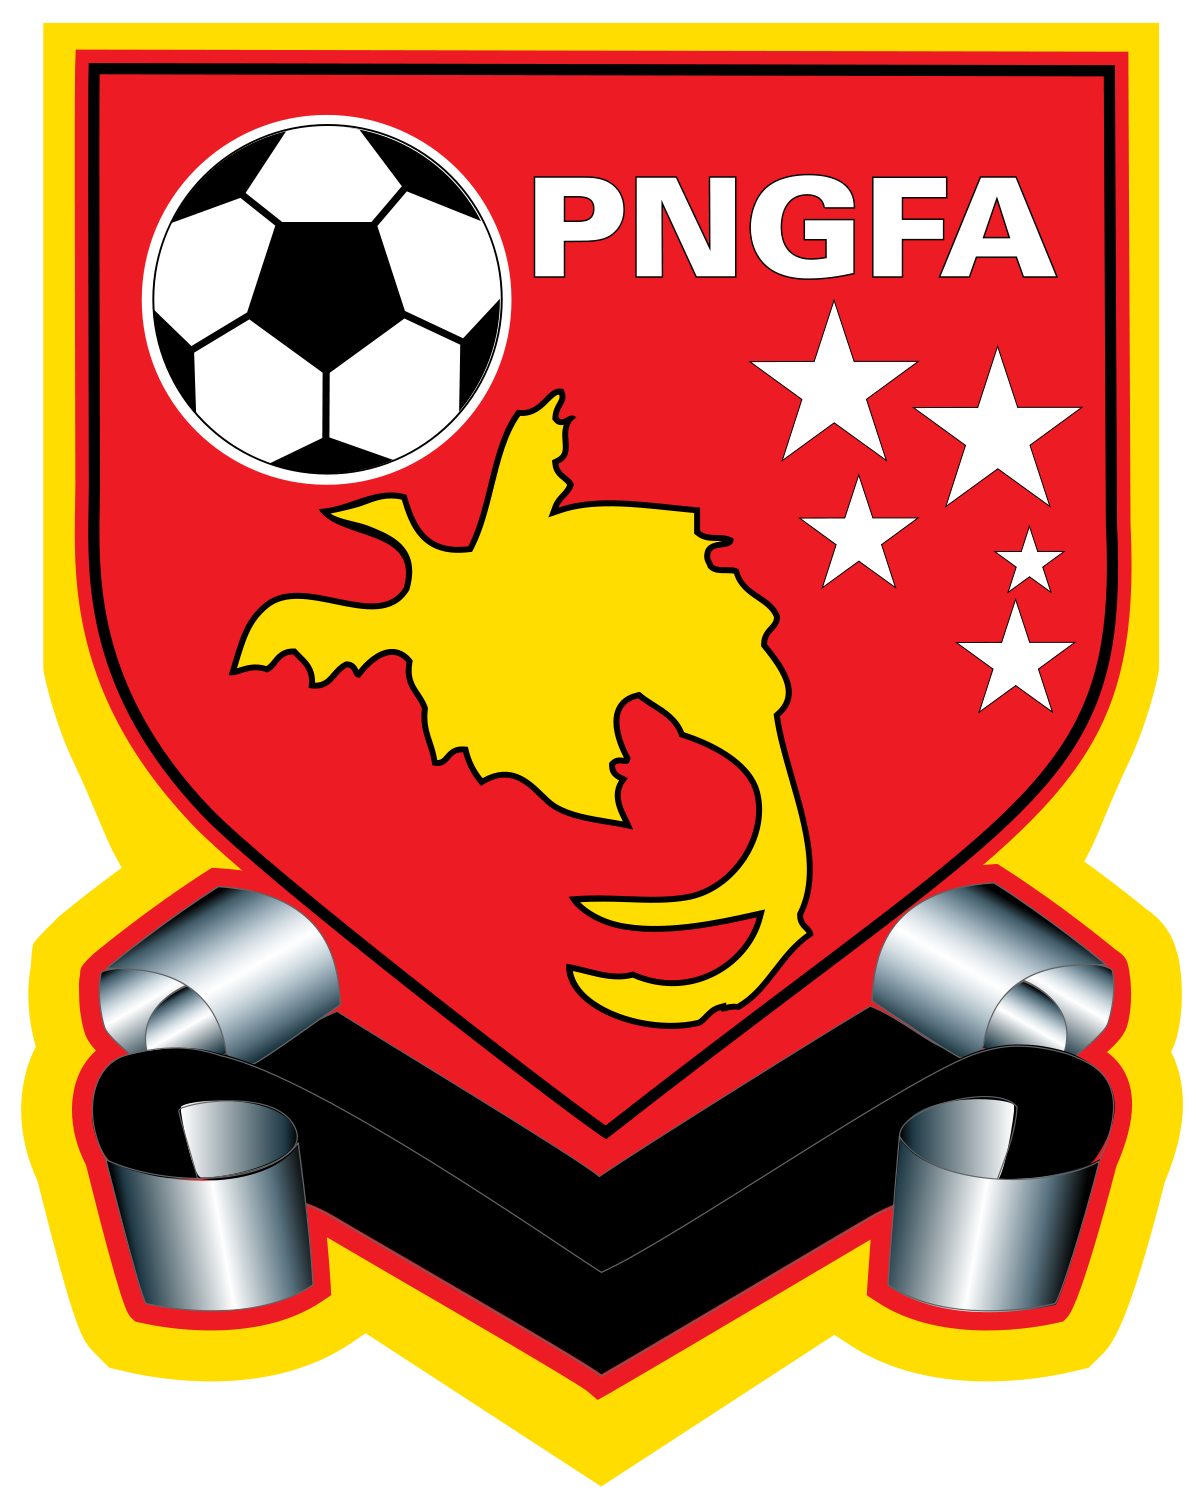 Png For Football Hdpng.com 1200 - For Football, Transparent background PNG HD thumbnail